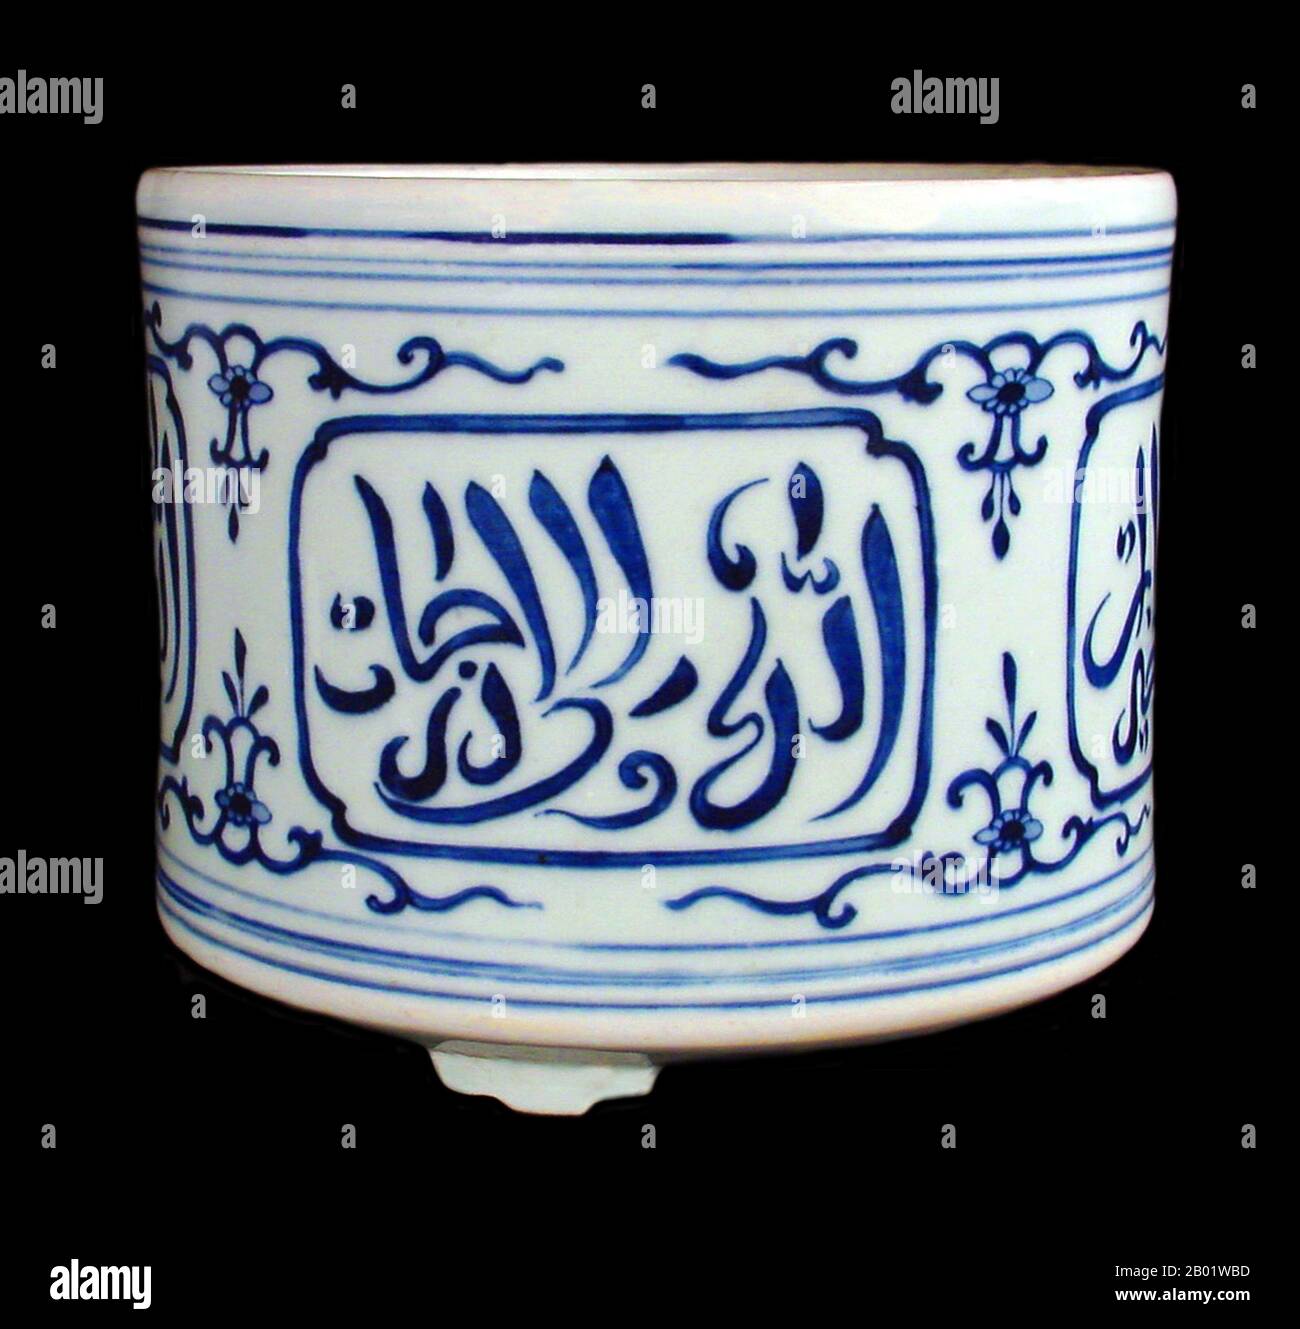 China: An incense burner of blue-and-white Jingdezhen porcelain made for the Chinese-speaking Hui Muslim minority in China, c. early 17th century.  The Hui people are a Muslim ethnic group in China. Hui people are found throughout the country, though they are concentrated mainly in the provinces of Ningxia, Qinghai, and Gansu.  According to a 2000 census, China is home to approximately 9.8 million Hui, the majority of whom are Chinese-speaking practitioners of Islam. Although many Hui people are ethnically similar to Han Chinese, the group has retained some Persian and Central Asian features. Stock Photo